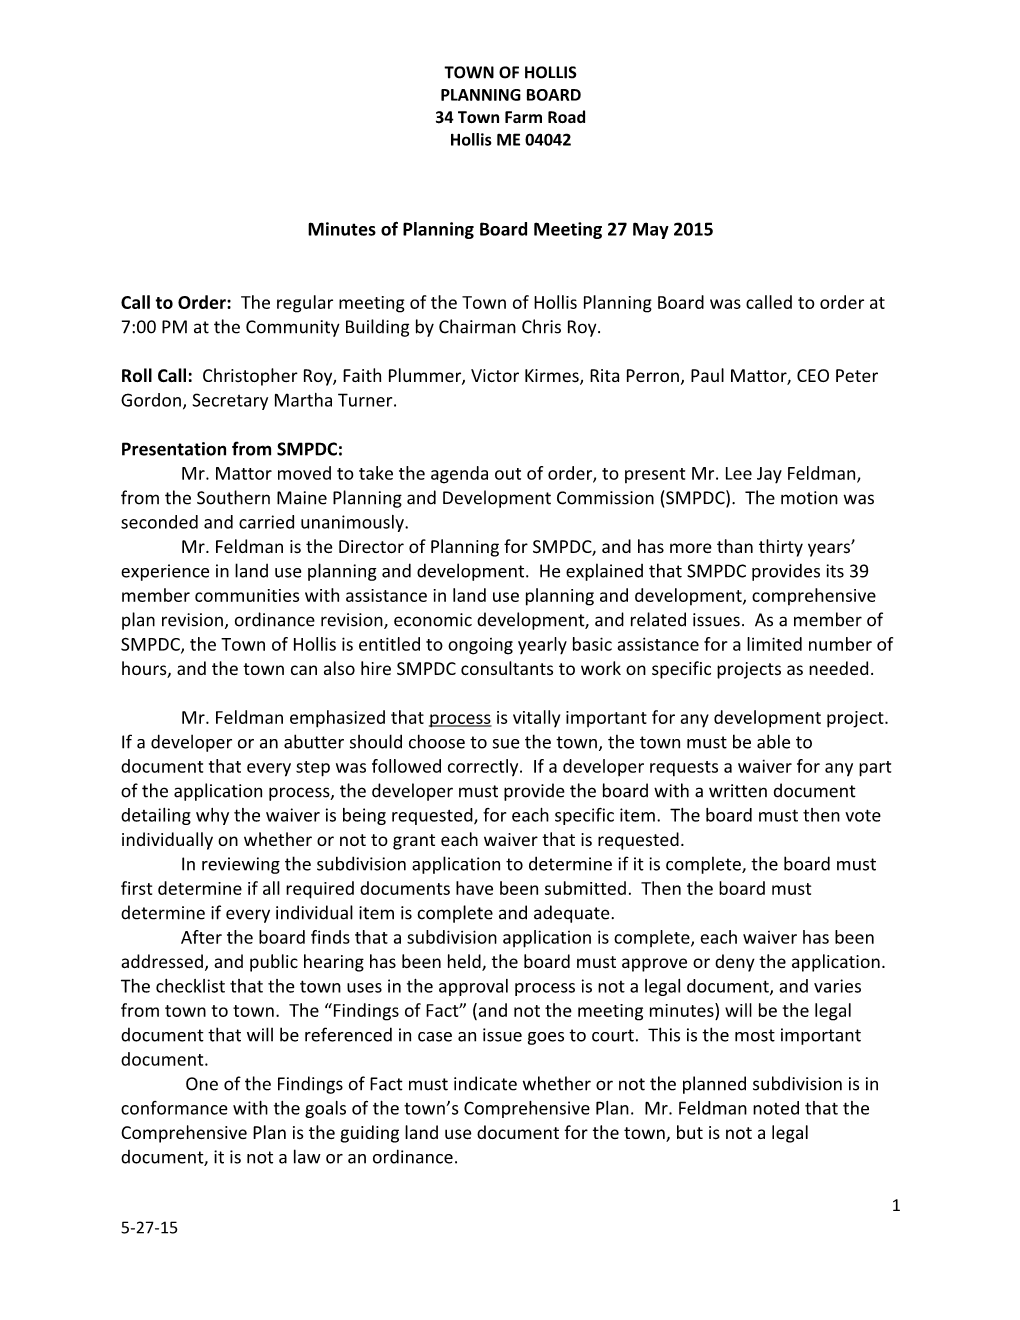 Minutes of Planning Board Meeting 27 May 2015